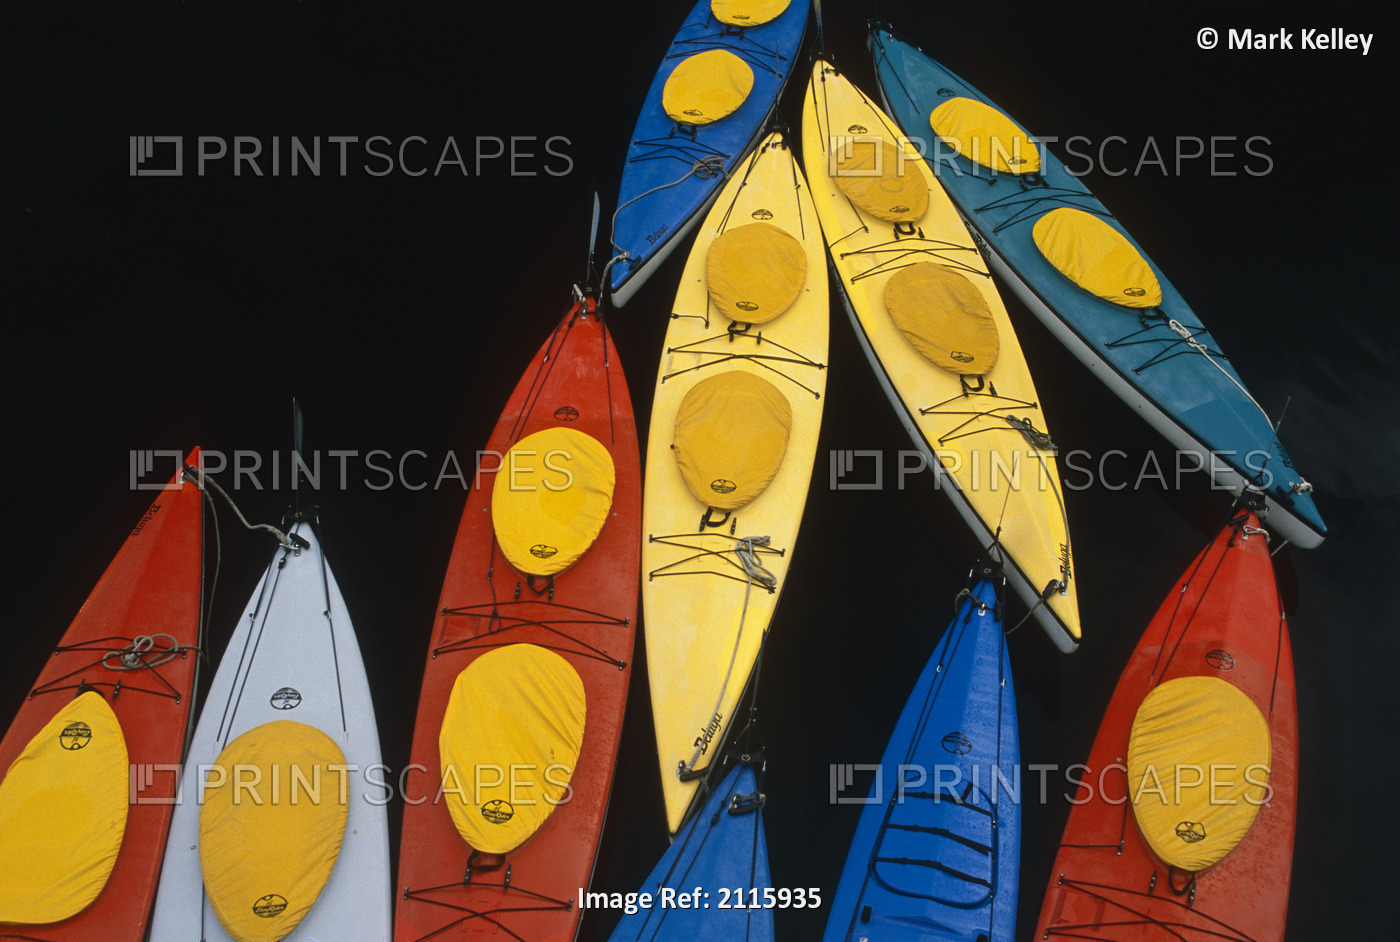 Abstract Overview Of Colorful Kayaks Tied Up Together On Water Inside Passage ...